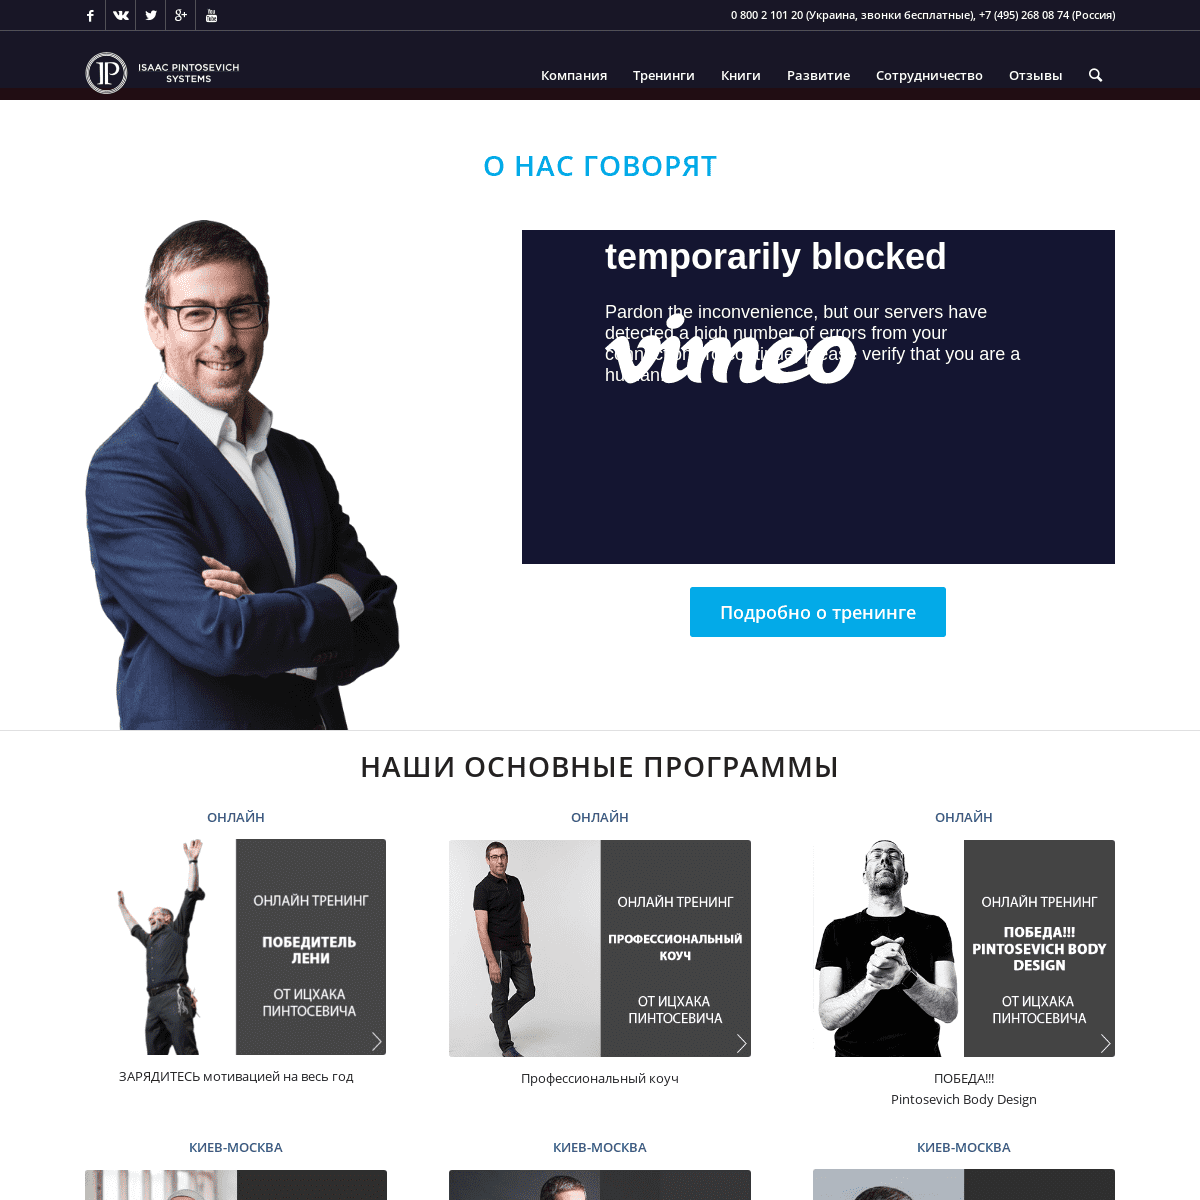 A complete backup of pintosevich.com